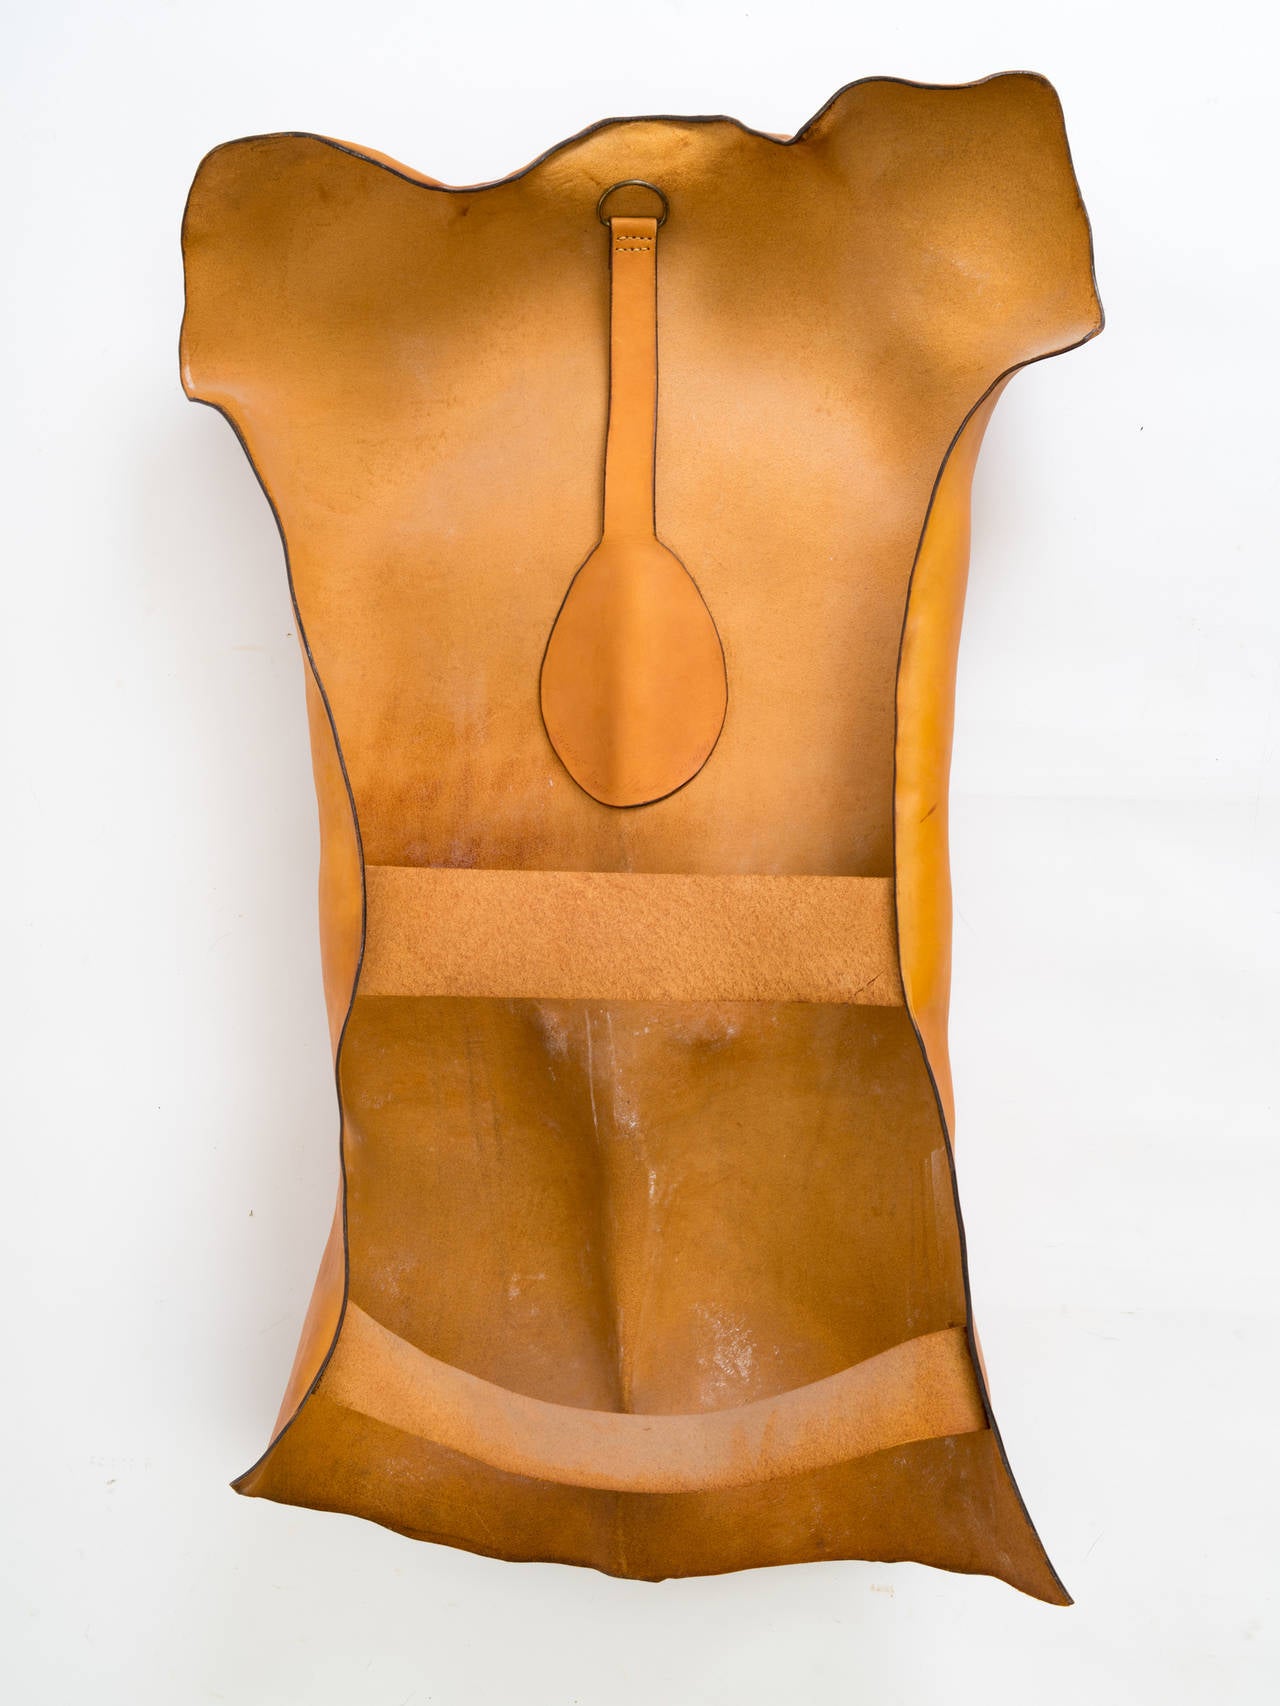 Leather Torso Sculpture by Marcia Lloyd 4